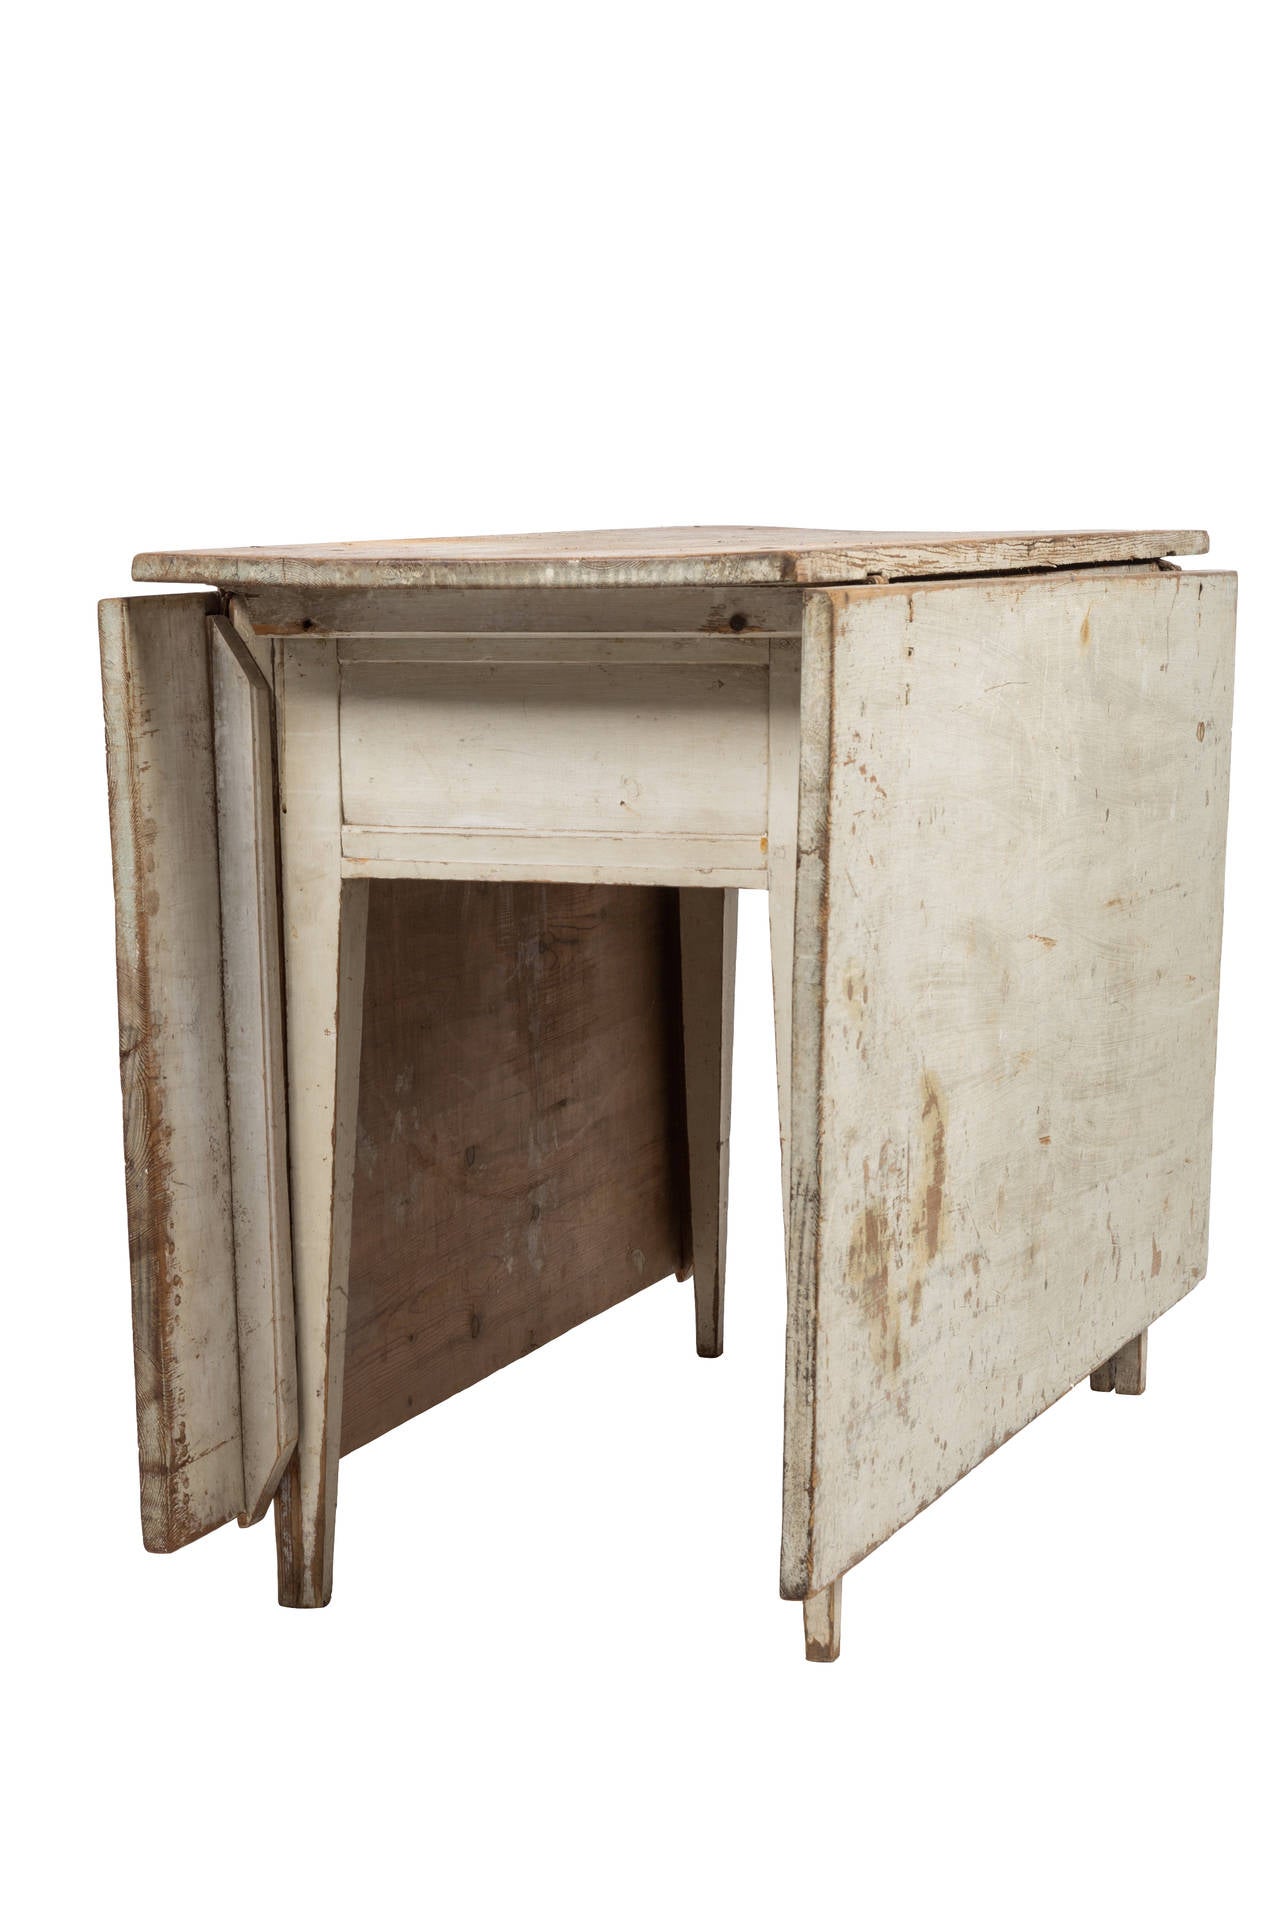 Antique Swedish Drop-Leaf Table  In Distressed Condition In New Orleans, LA